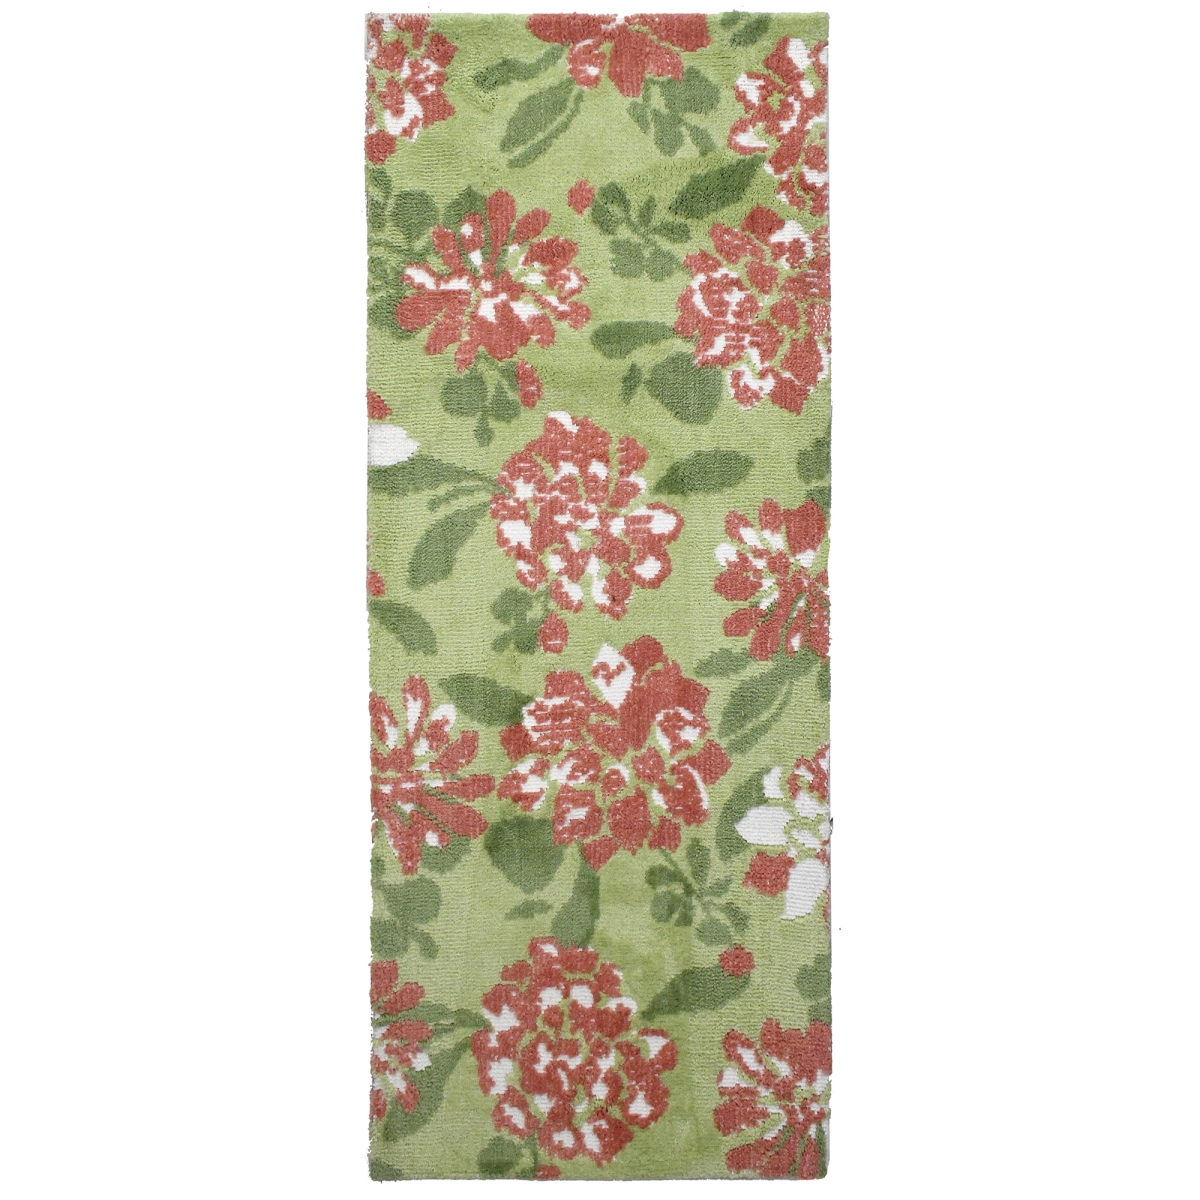 Ss-dby004j 21 X 54 In. Summer Floral Runner Indoor Area Rug